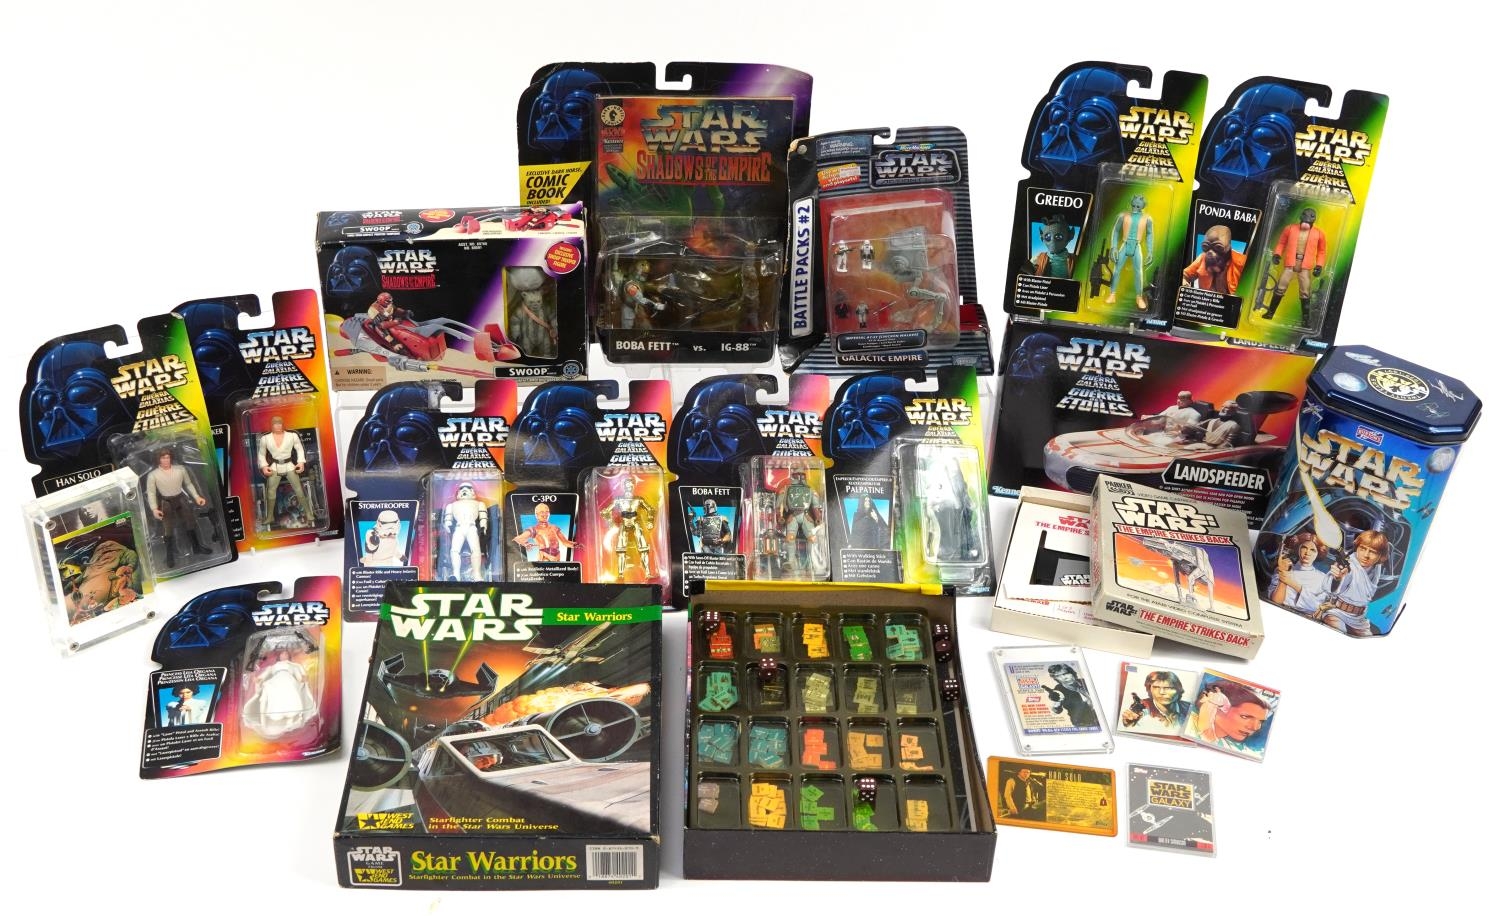 Vintage and later Star Wars toys and collectables including action figures housed in sealed